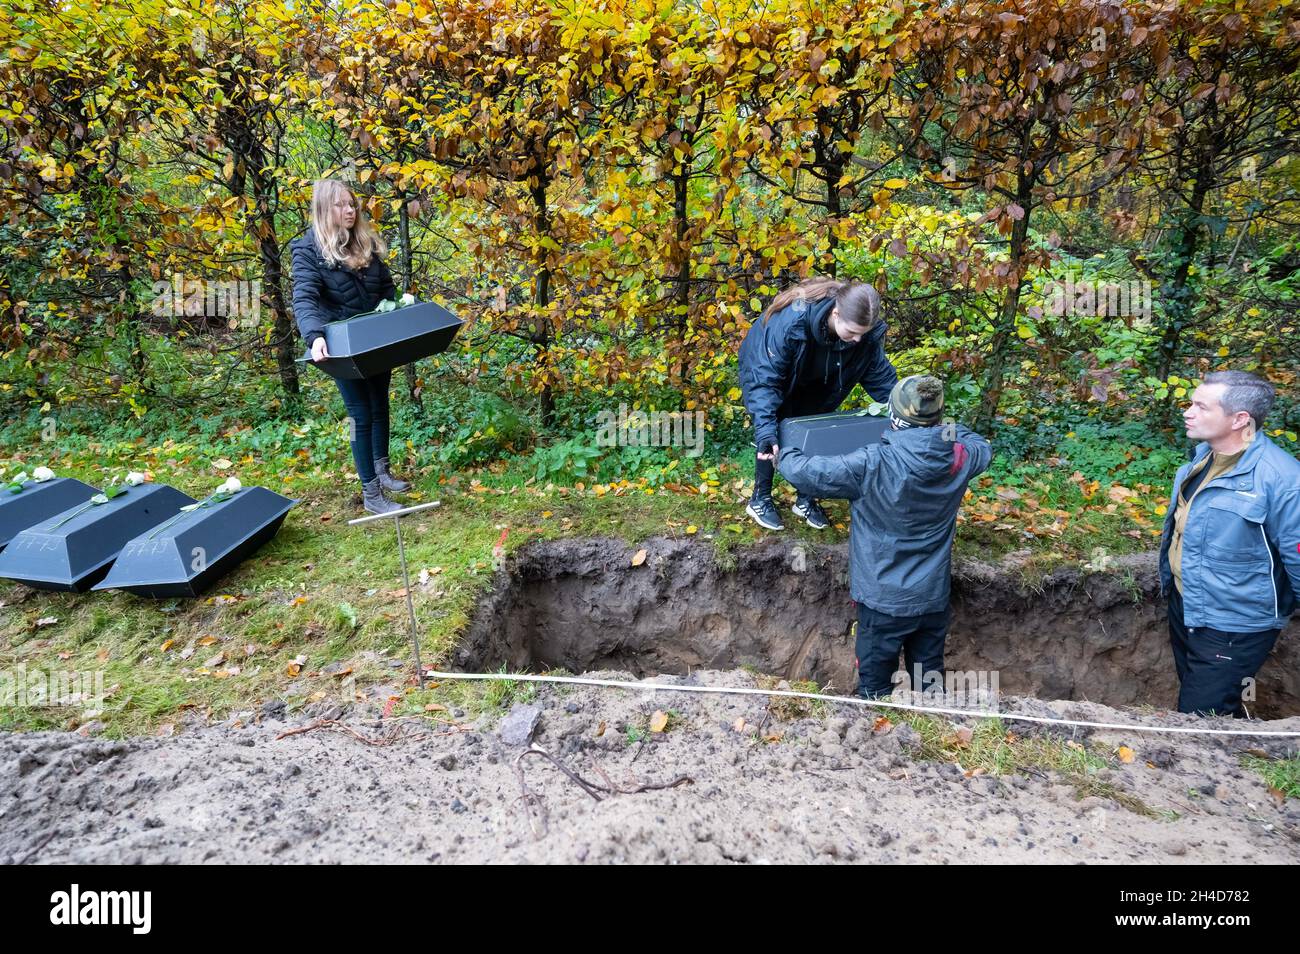 Dresden, Germany. 02nd Nov, 2021. Pupils of ninth-grade classes at a Dresden secondary school are helping to bury war dead by the German War Graves Commission. During construction work in Dresden's city center last year, the remains of most likely civilian war victims were found and have now been laid to rest in coffins at the war gravesite of the Johannis Cemetery. Credit: Matthias Rietschel/dpa/Alamy Live News Stock Photo